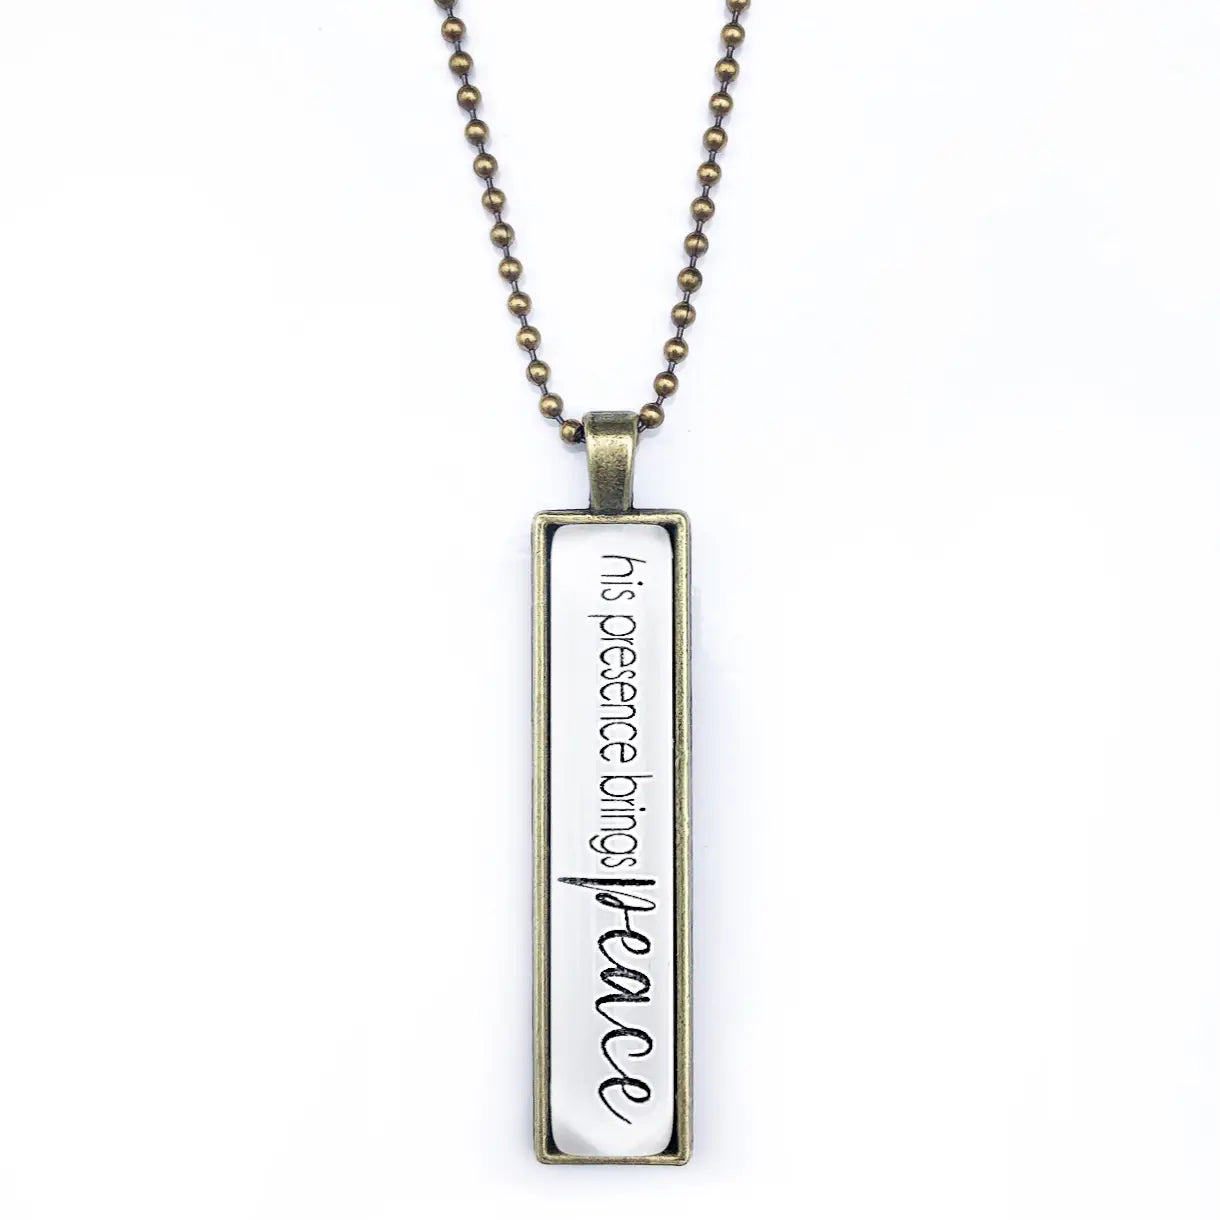 His Presence Necklace